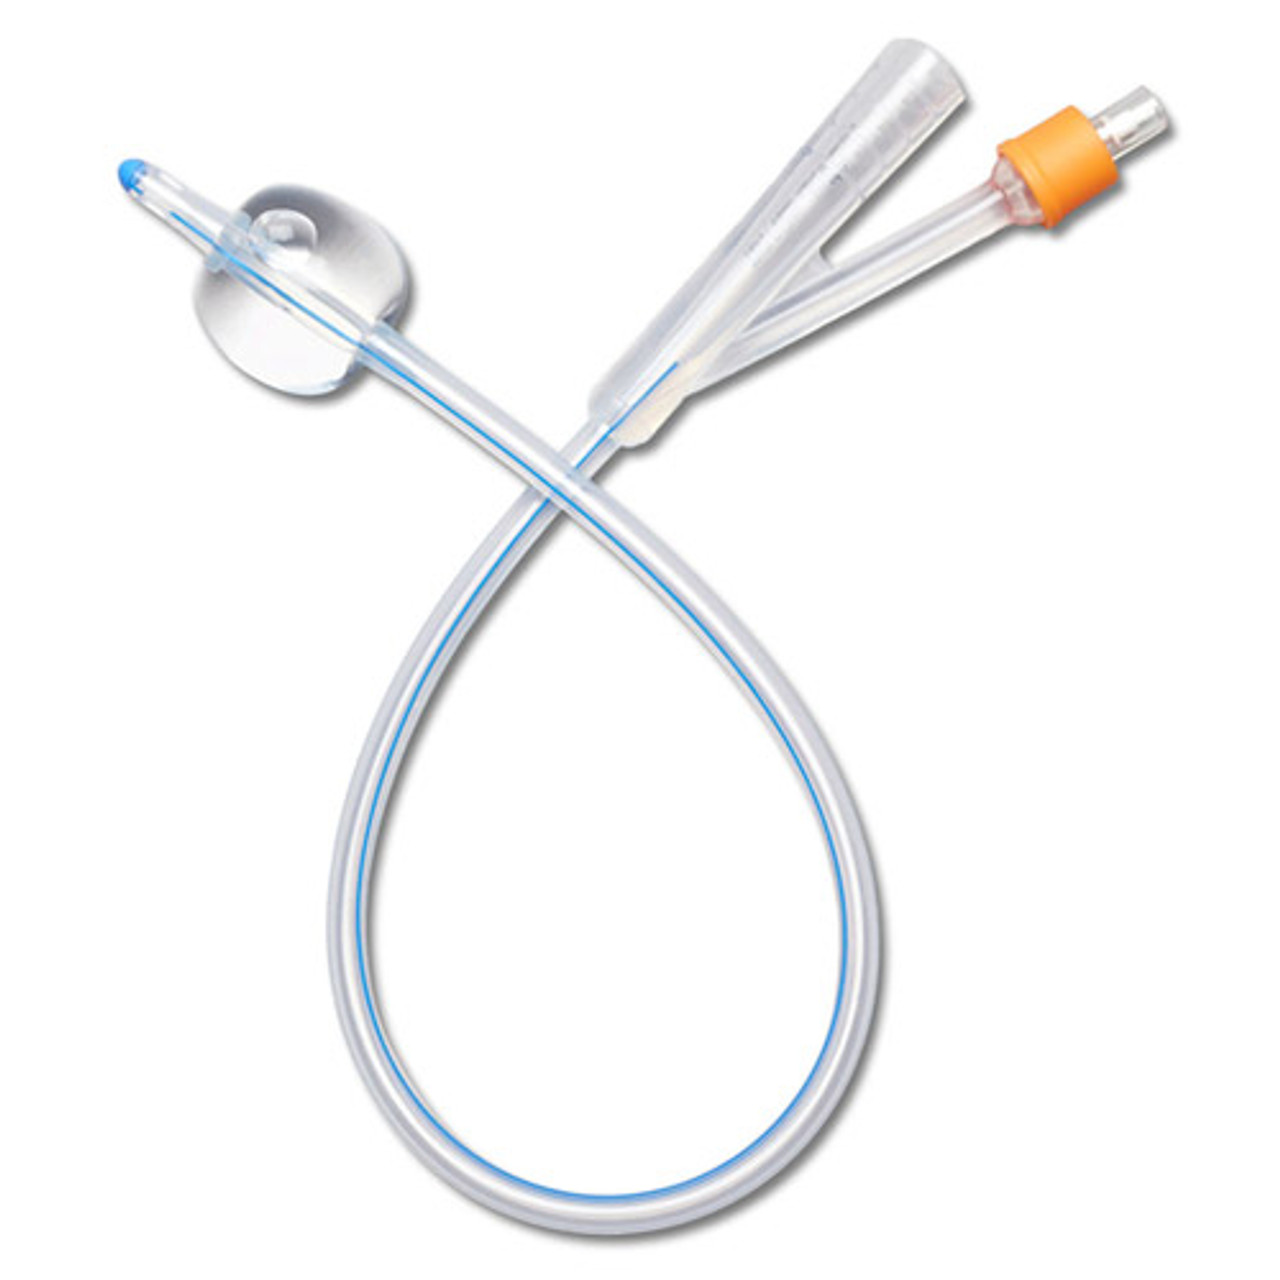 Medline 11532 2-Way Silicone Foley Catheter 16FR 30cc Balloon Capacity, 100% Silicone, Latex-free, Sterile BX/10 (11532)